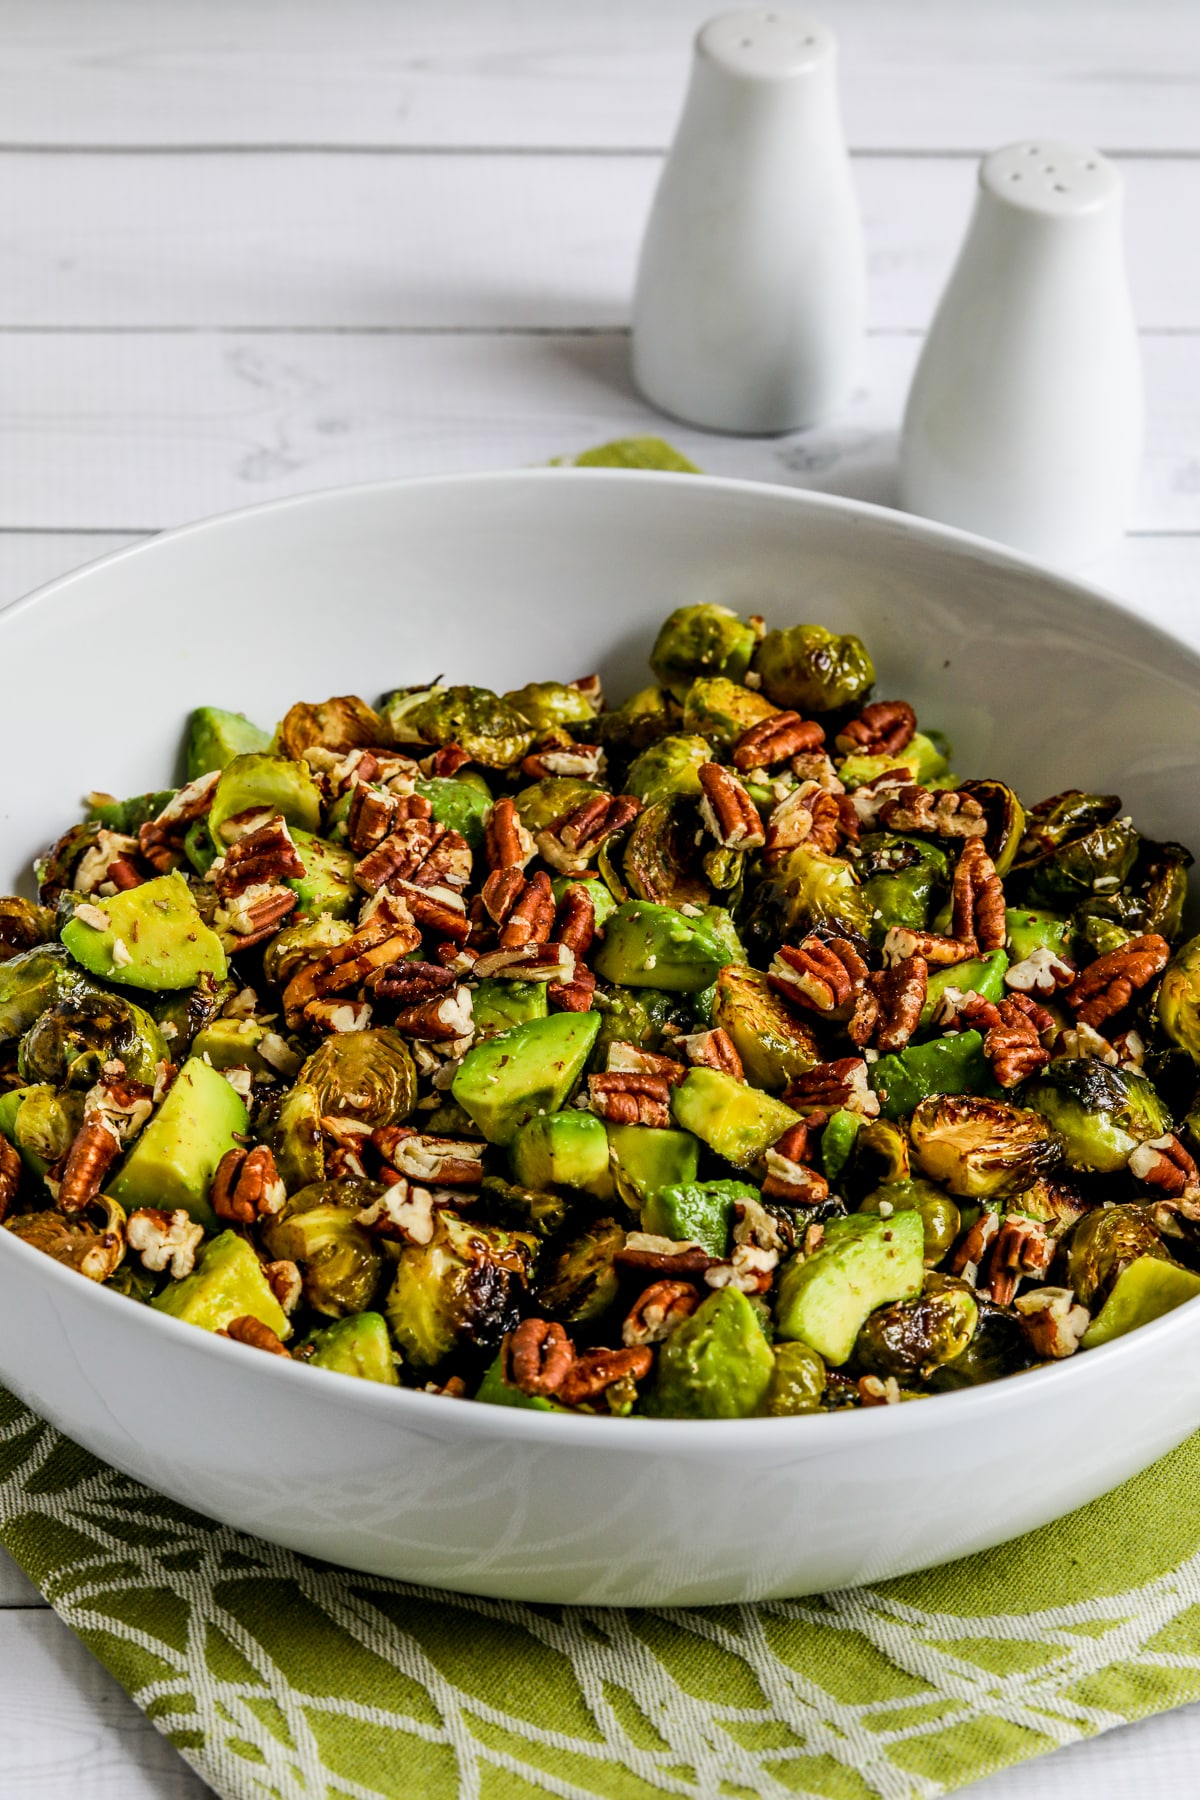 Roasted Brussels Sprouts with Avocados and Pecans shown in serving bowl on green-white napkin